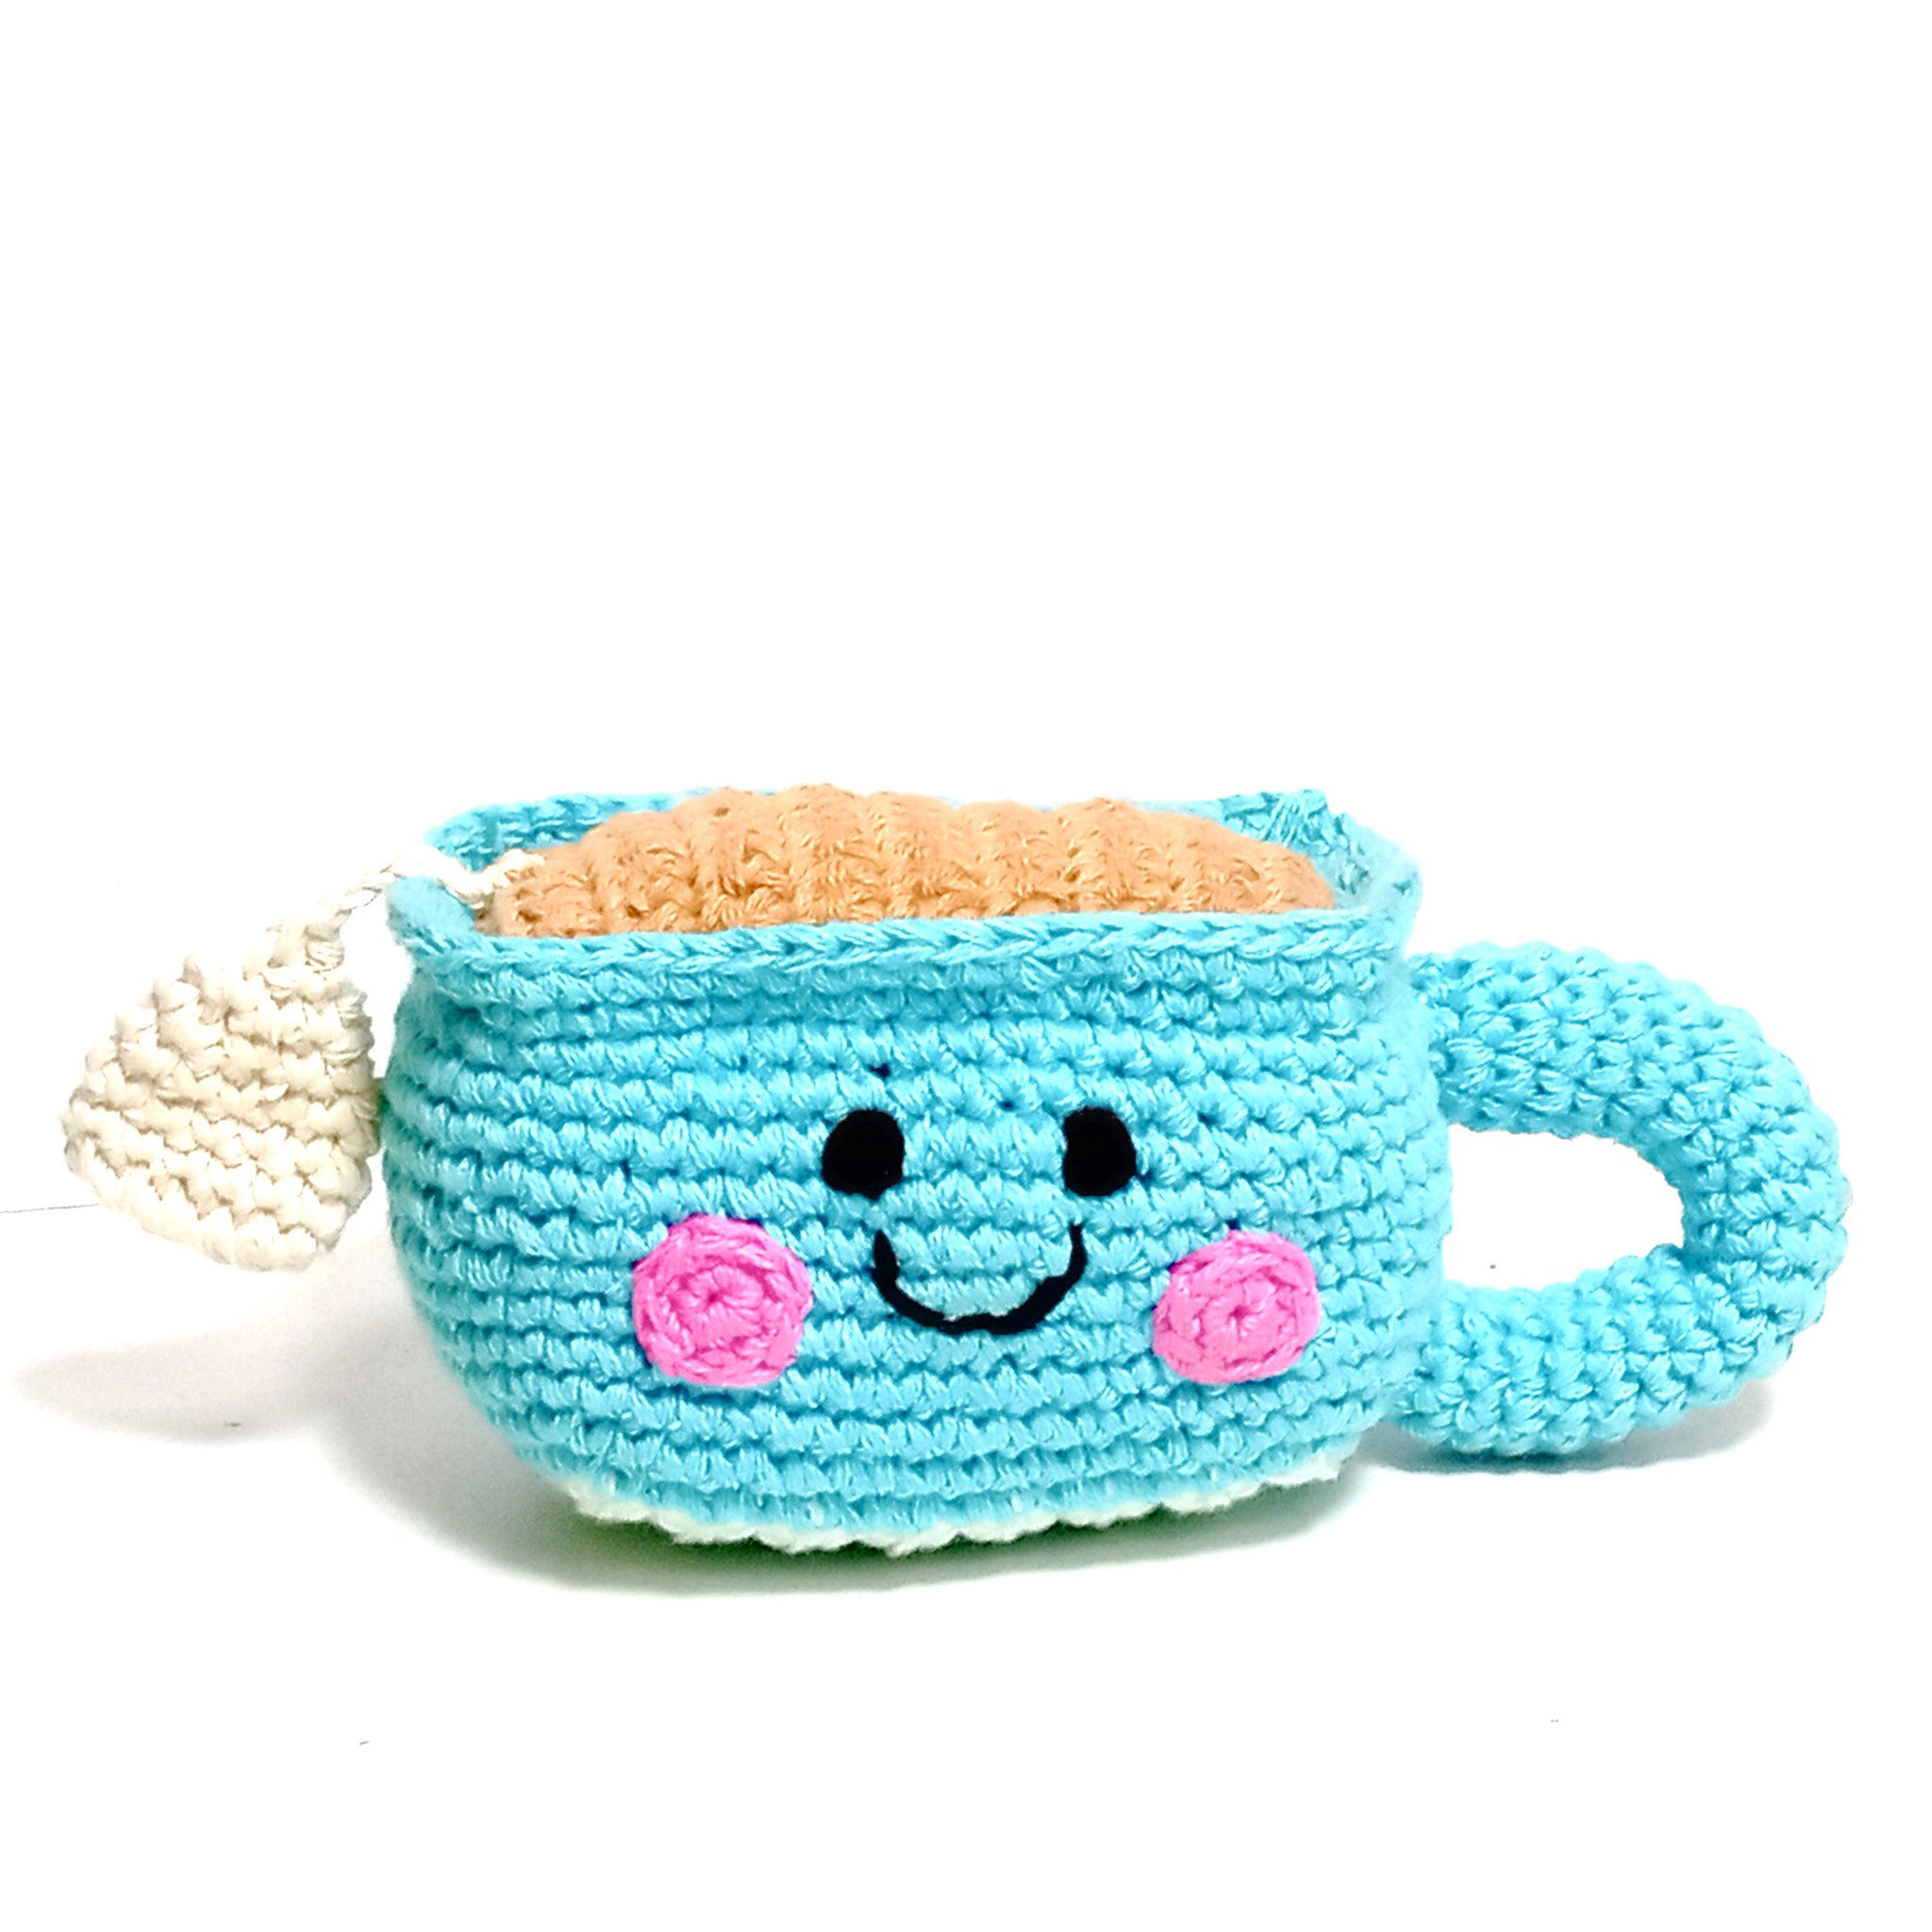 Handmade Crochet Cup of Chai Latte Baby Toy Rattle